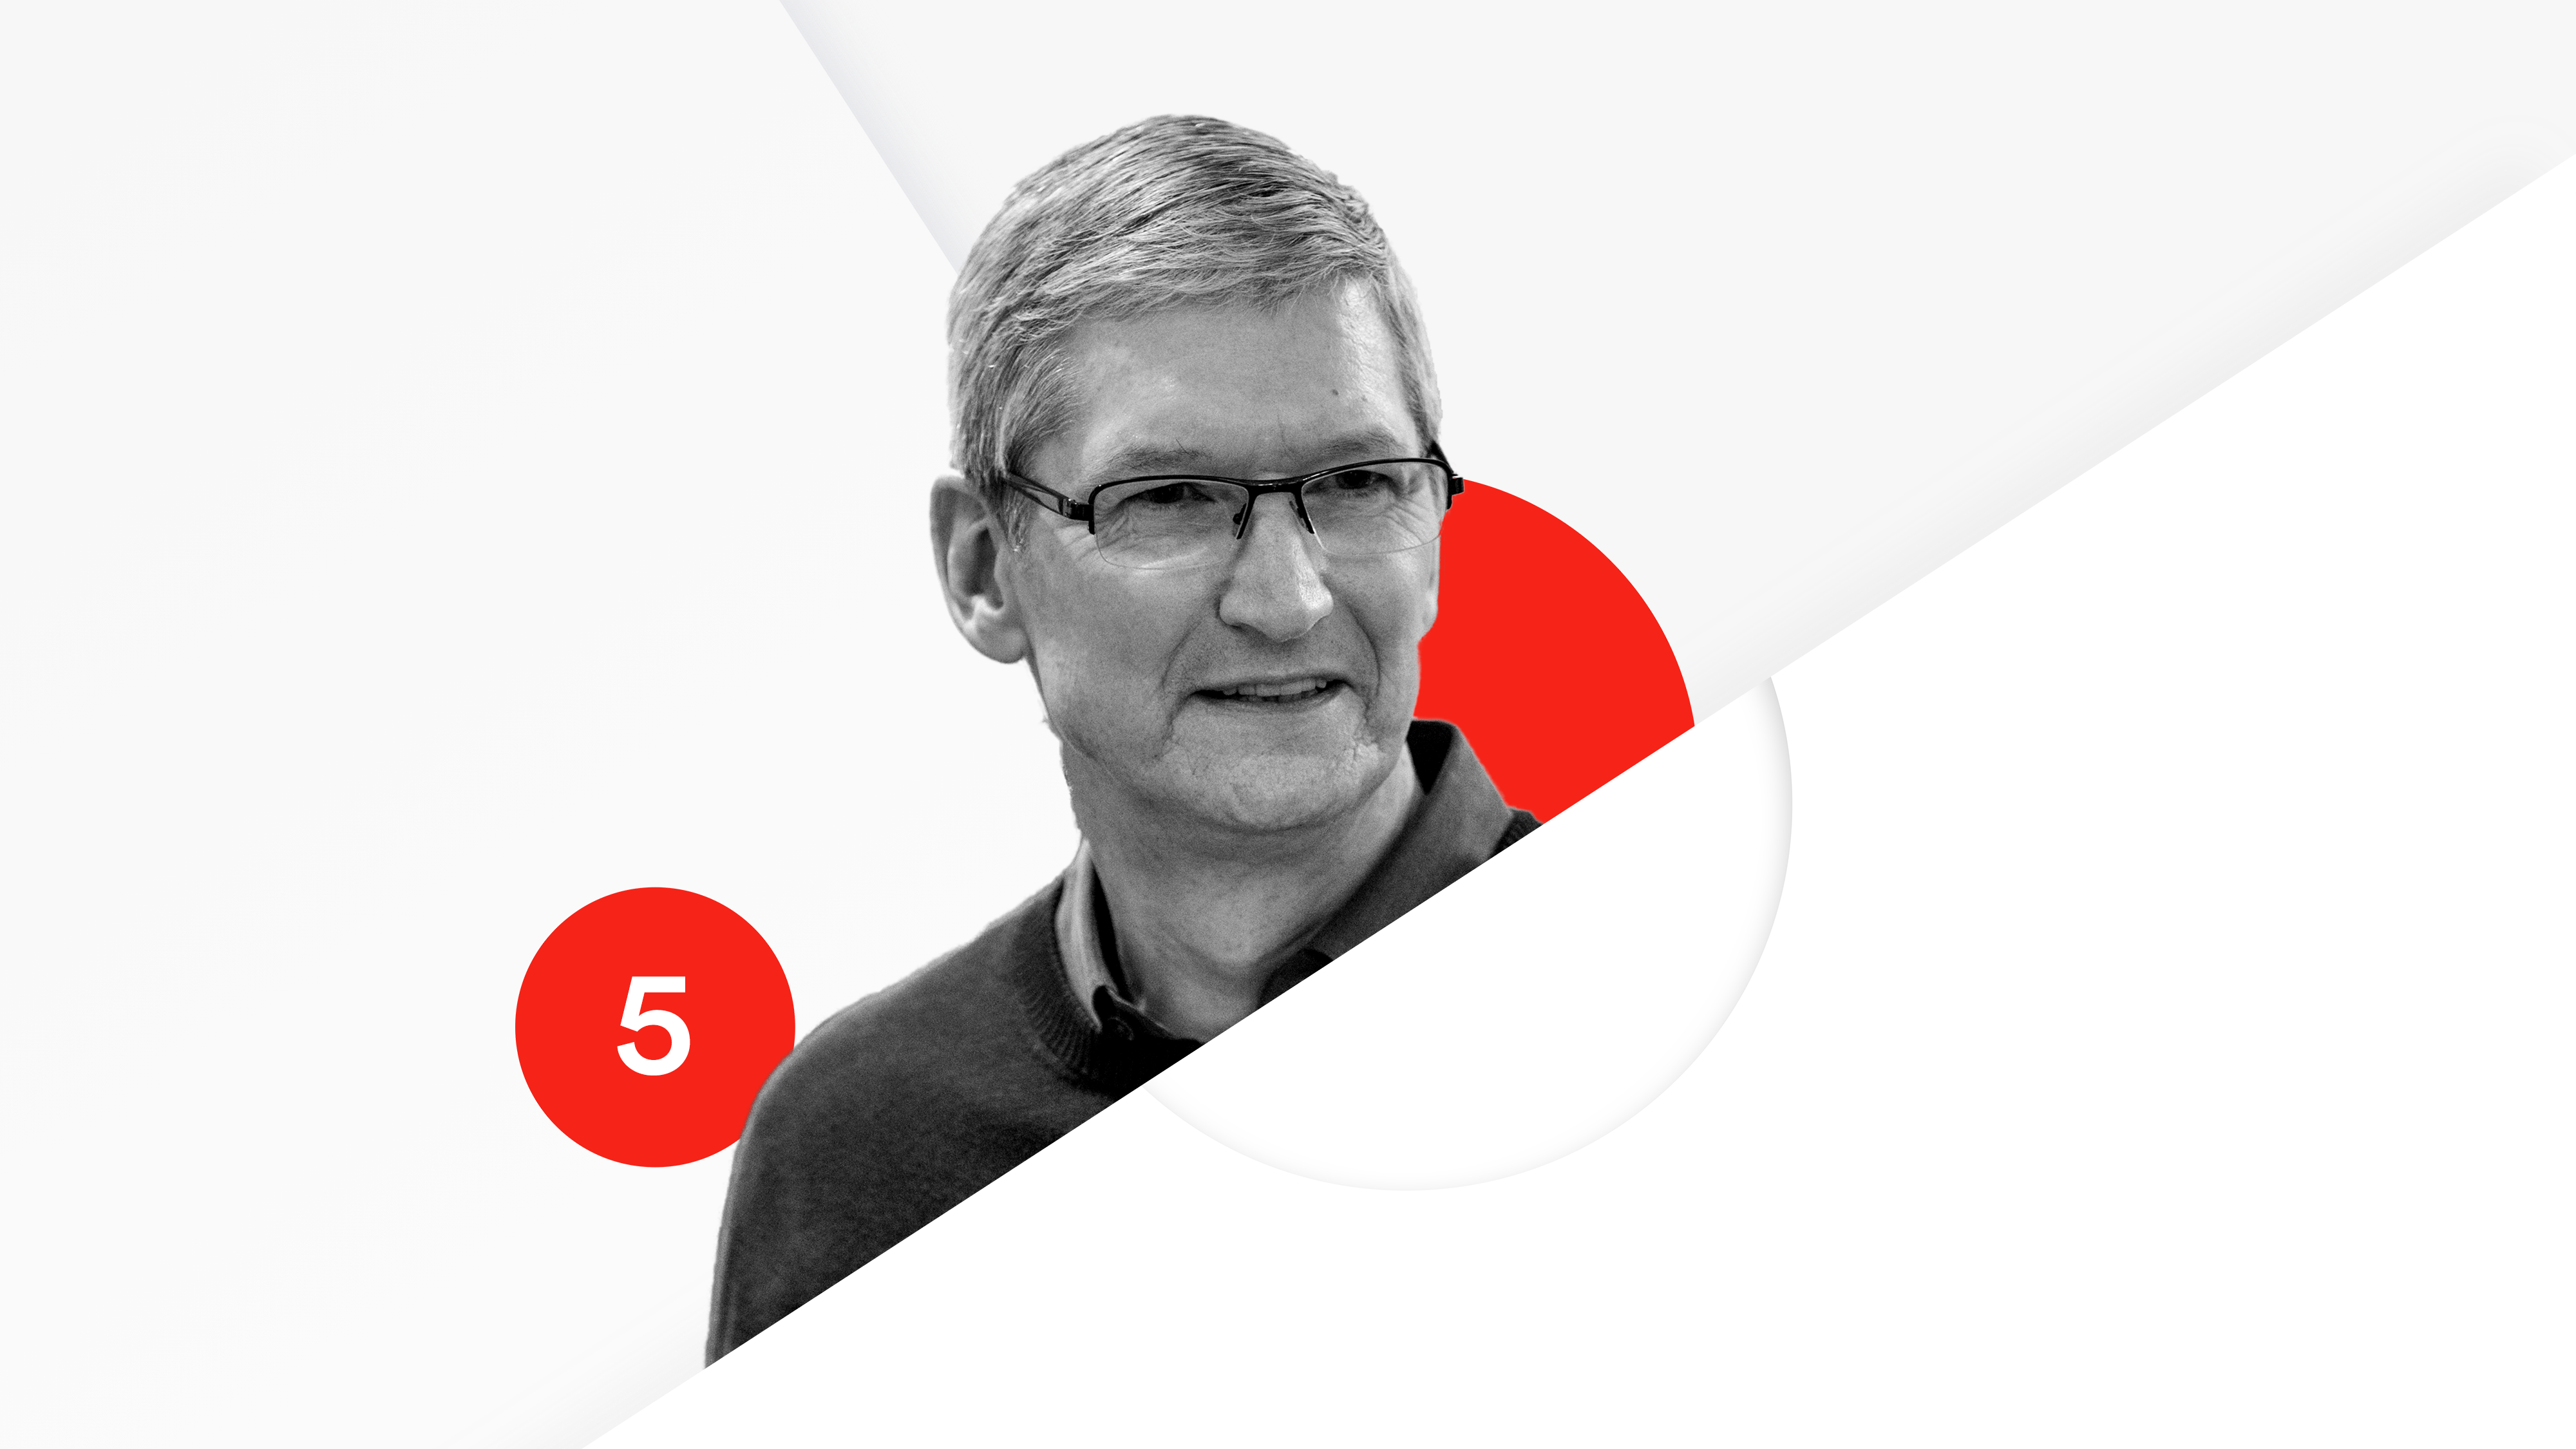 Apple’s Tim Cook is No. 5 on the Recode 100.